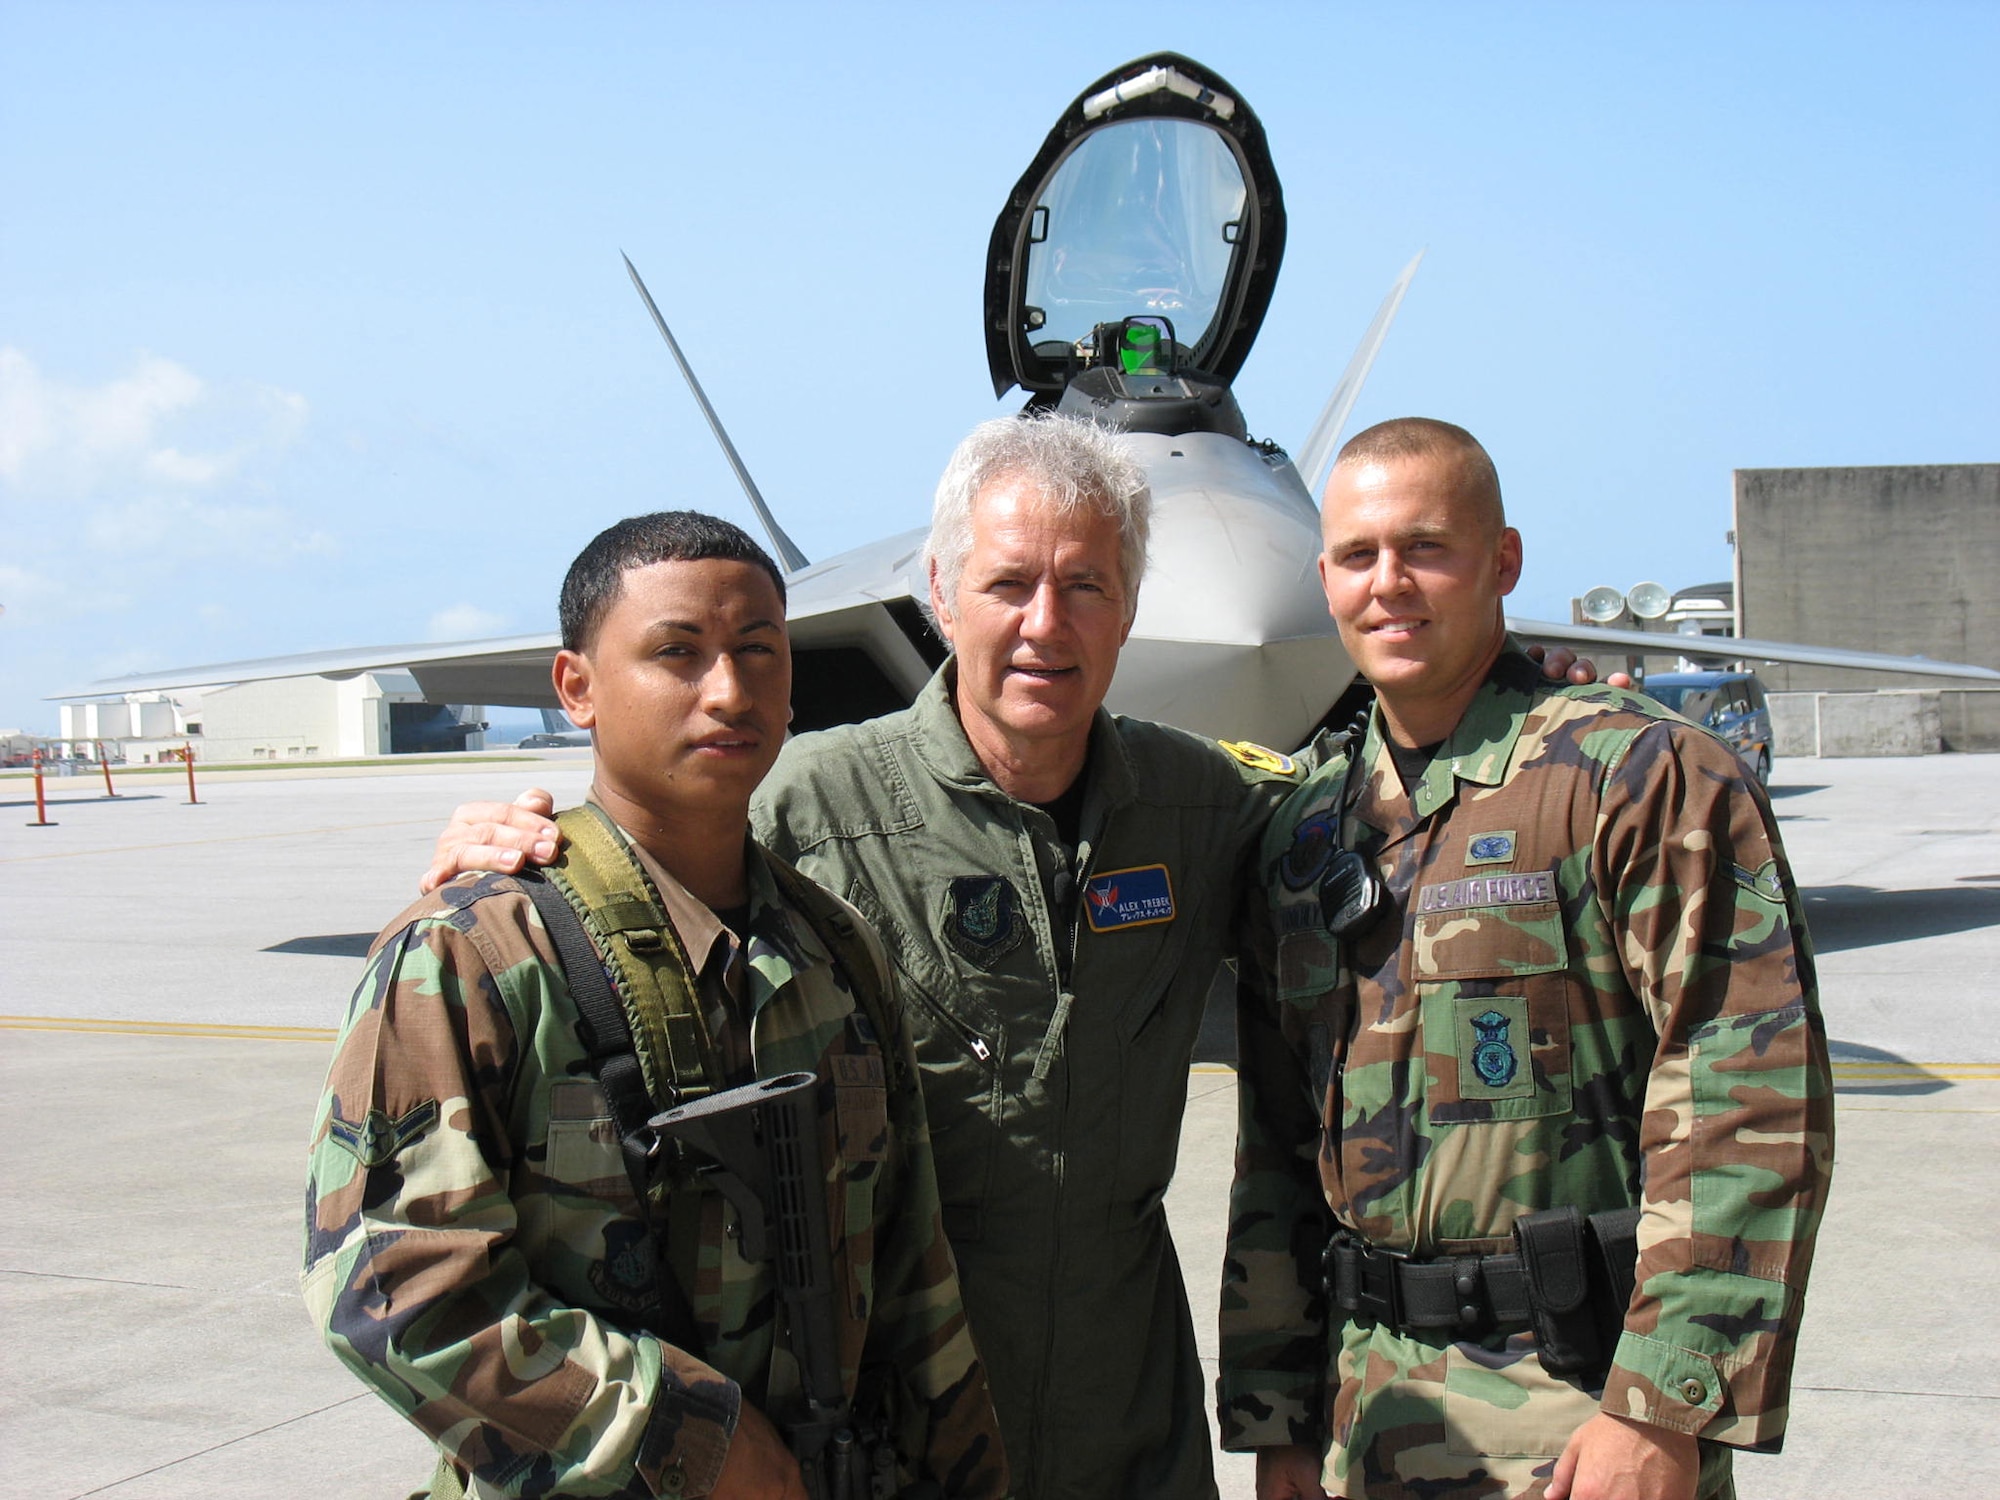 KADENA AIR BASE, Japan -- Alex Trebek, host of the Jeopardy game show, poses for a photo with Airman Jake Froehly (right) and Airman Adam Flores March 31 during a Jeopardy game show USO tour of Japan.  Both Airmen are with Kadena's 18th Security Forces Squadron.  During a two-day trip to Kadena March 30-31, Mr. Trebek and Jeopardy show staff also toured an F-22 stealth fighter, a KC-135 stratotanker, an E-3 AWACS (Airborne Warning and Control System), an F-15C fighter, and an HH-60 helicopter.  The F-22 is temporarily based at Kadena on its first overseas deployment from Langley Air Force Base, Va.  Kadena residents were allowed to try-out to be contestants on Jeopardy, as well.  (Air Force/Senior Master Sgt. Kenneth Fidler)